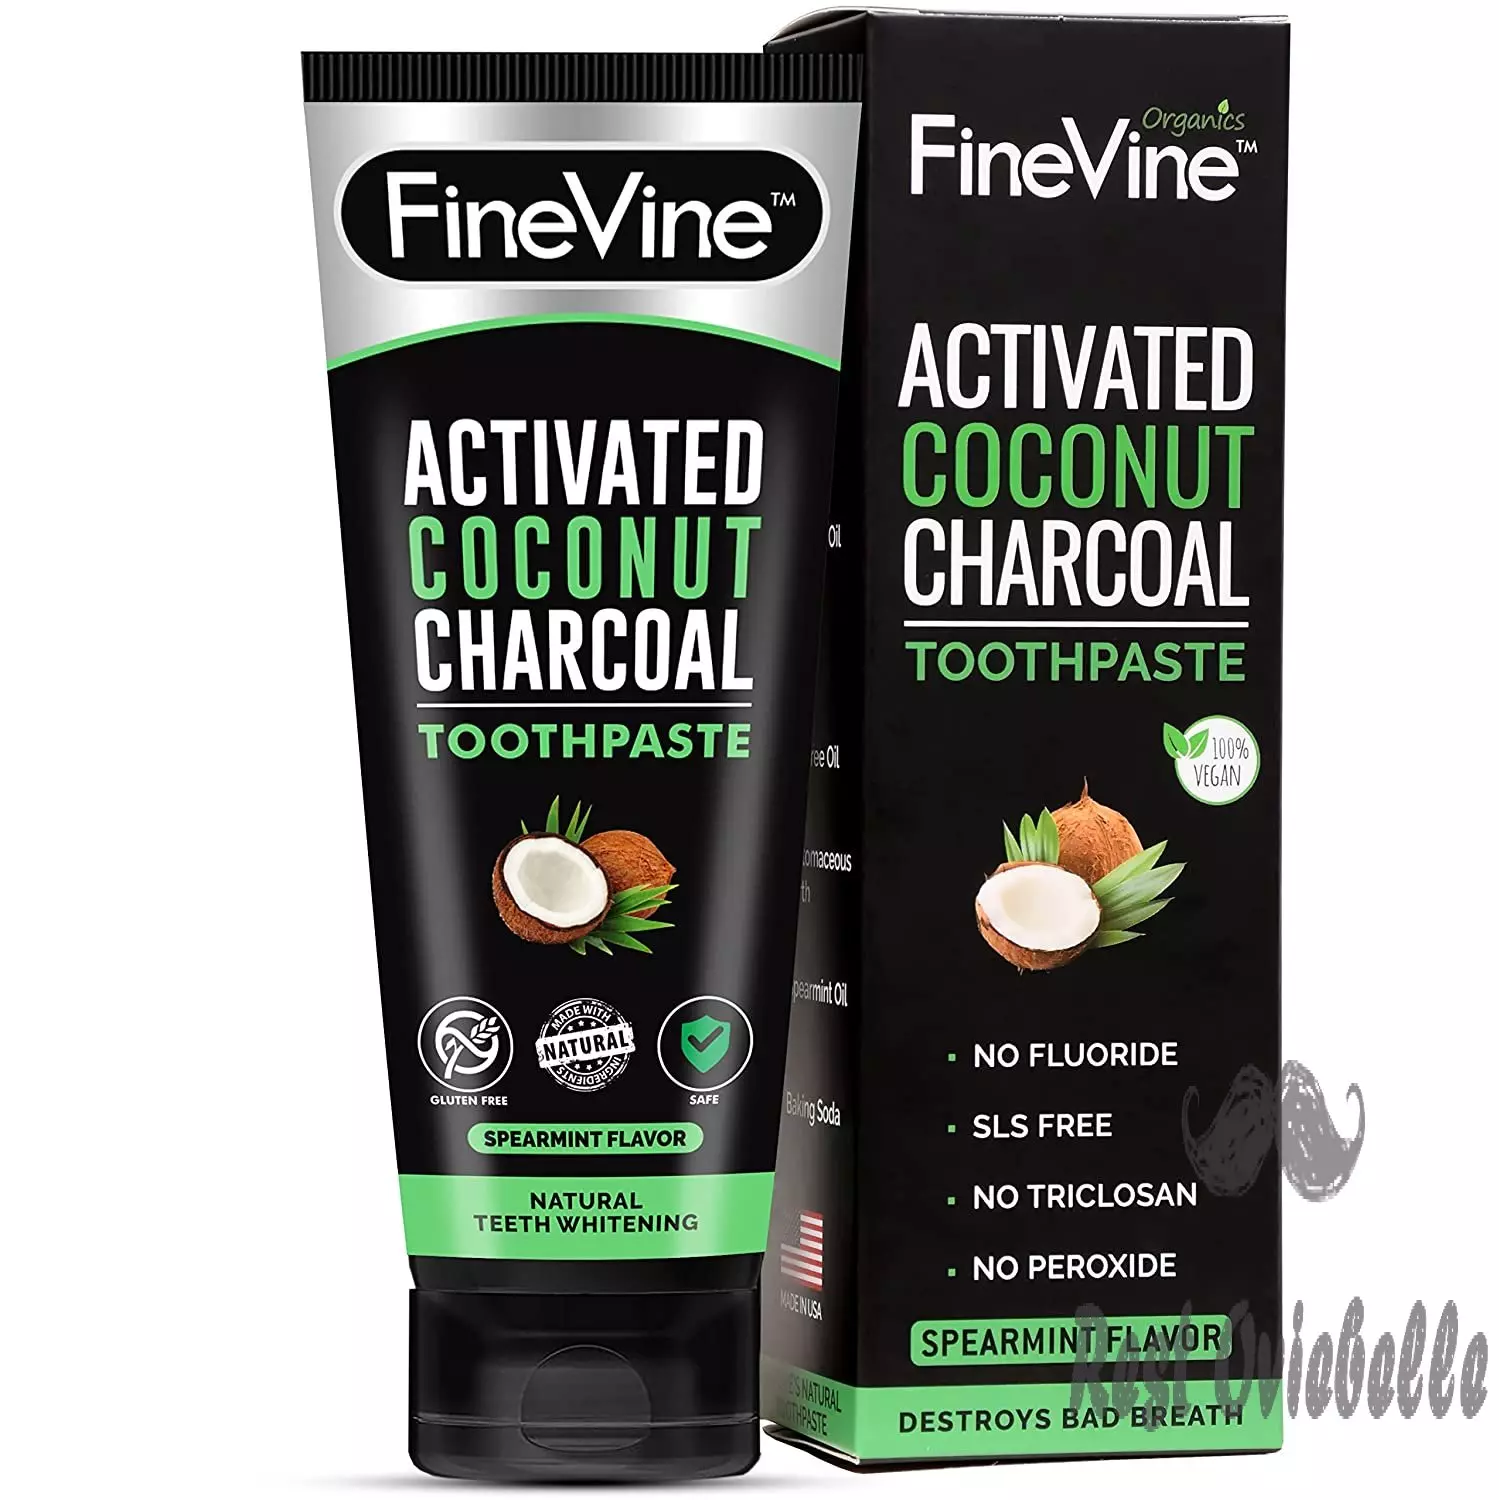 Finevine 100 Natural Charcoal Toothpaste